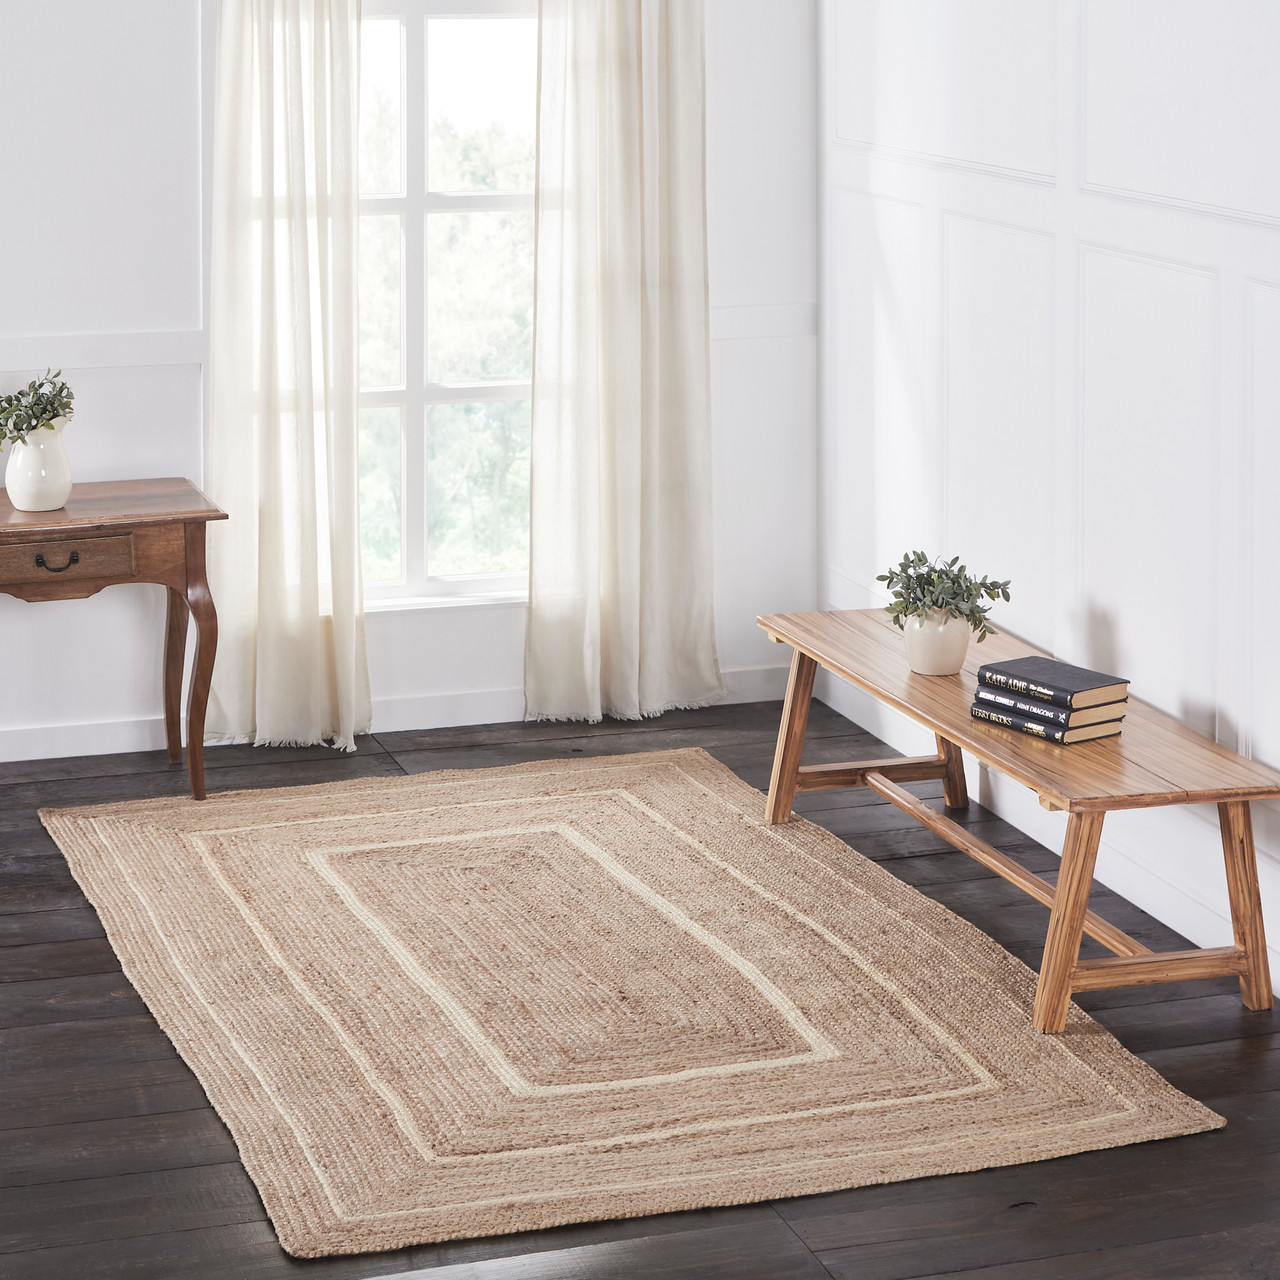 https://cdn11.bigcommerce.com/s-dwlxj/images/stencil/1280x1280/products/5299/12318/80378-vhc-brands-rectangle-braided-jute-rug-natural-cream-60x96-1__86396.1656633096.jpg?c=2